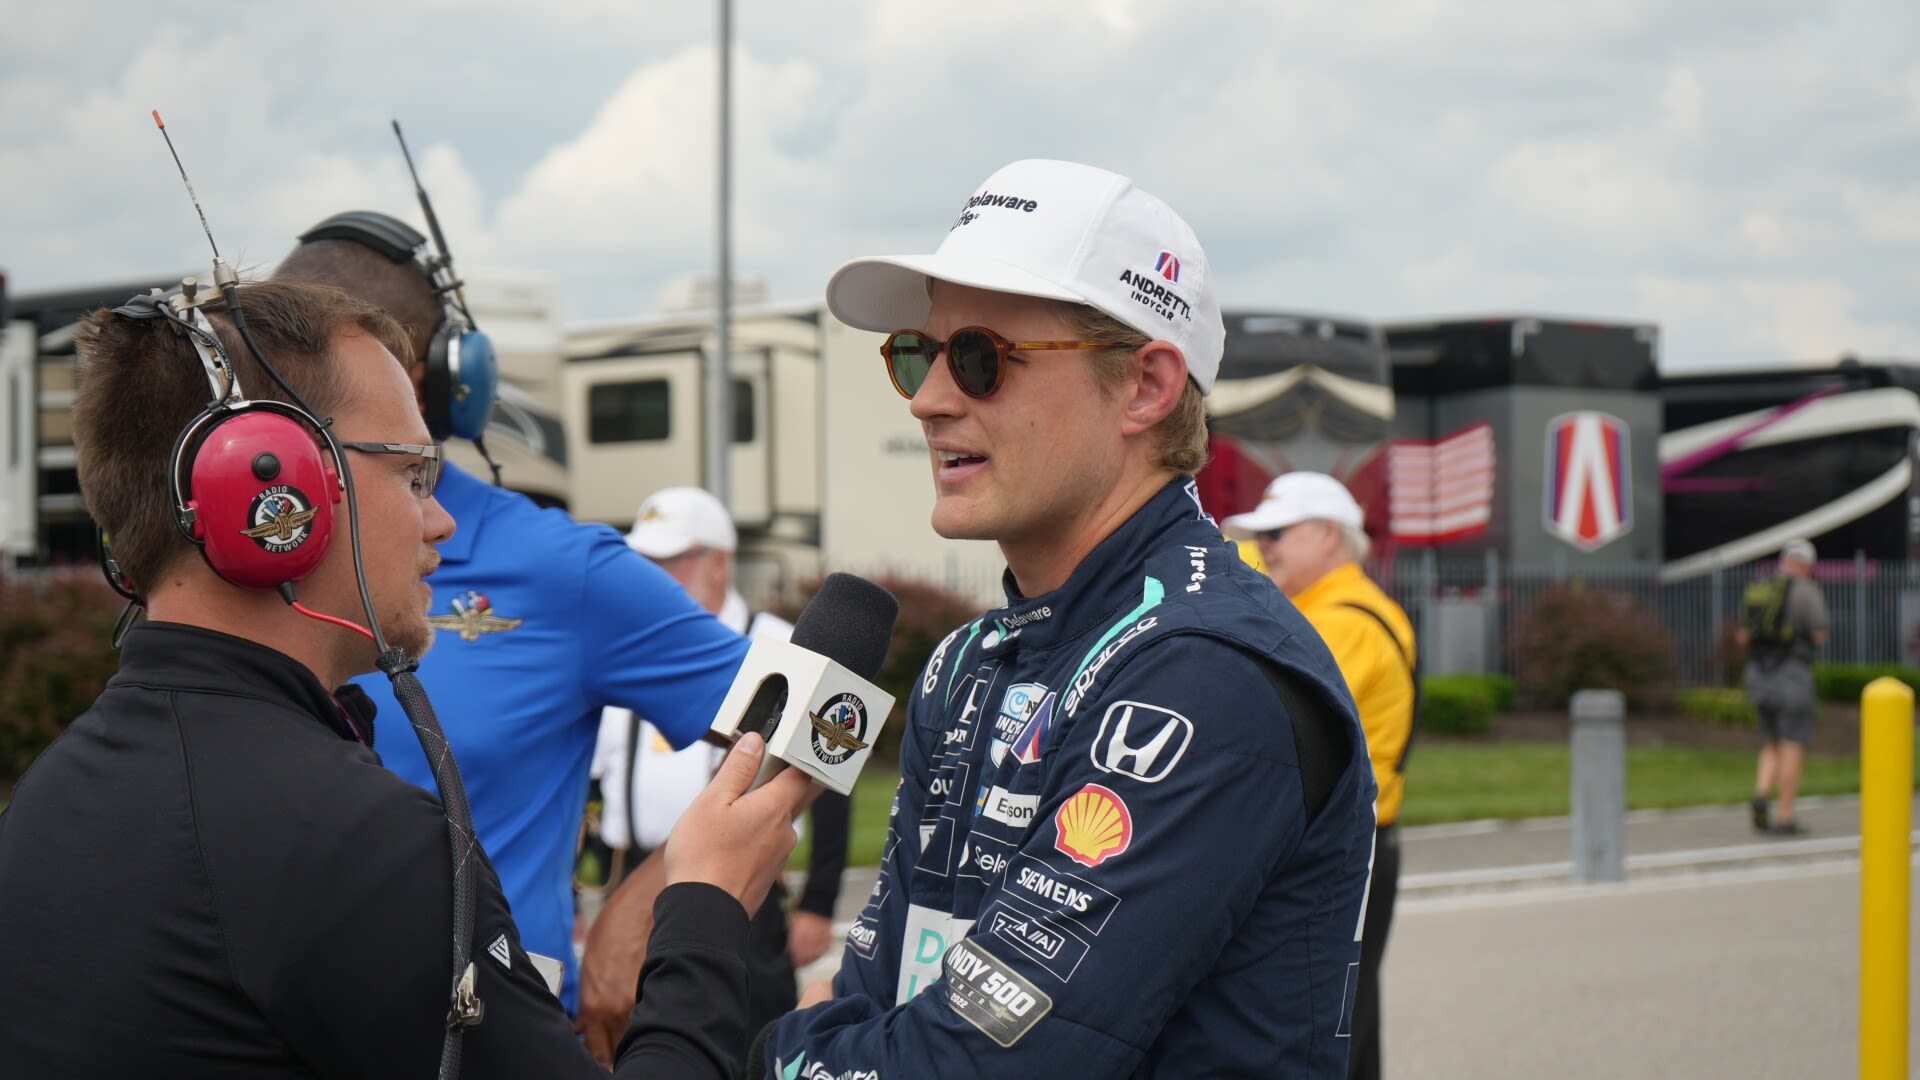 Marcus Ericsson OK after slamming Turn 4 walls, attenuator during Indy 500 practice wreck